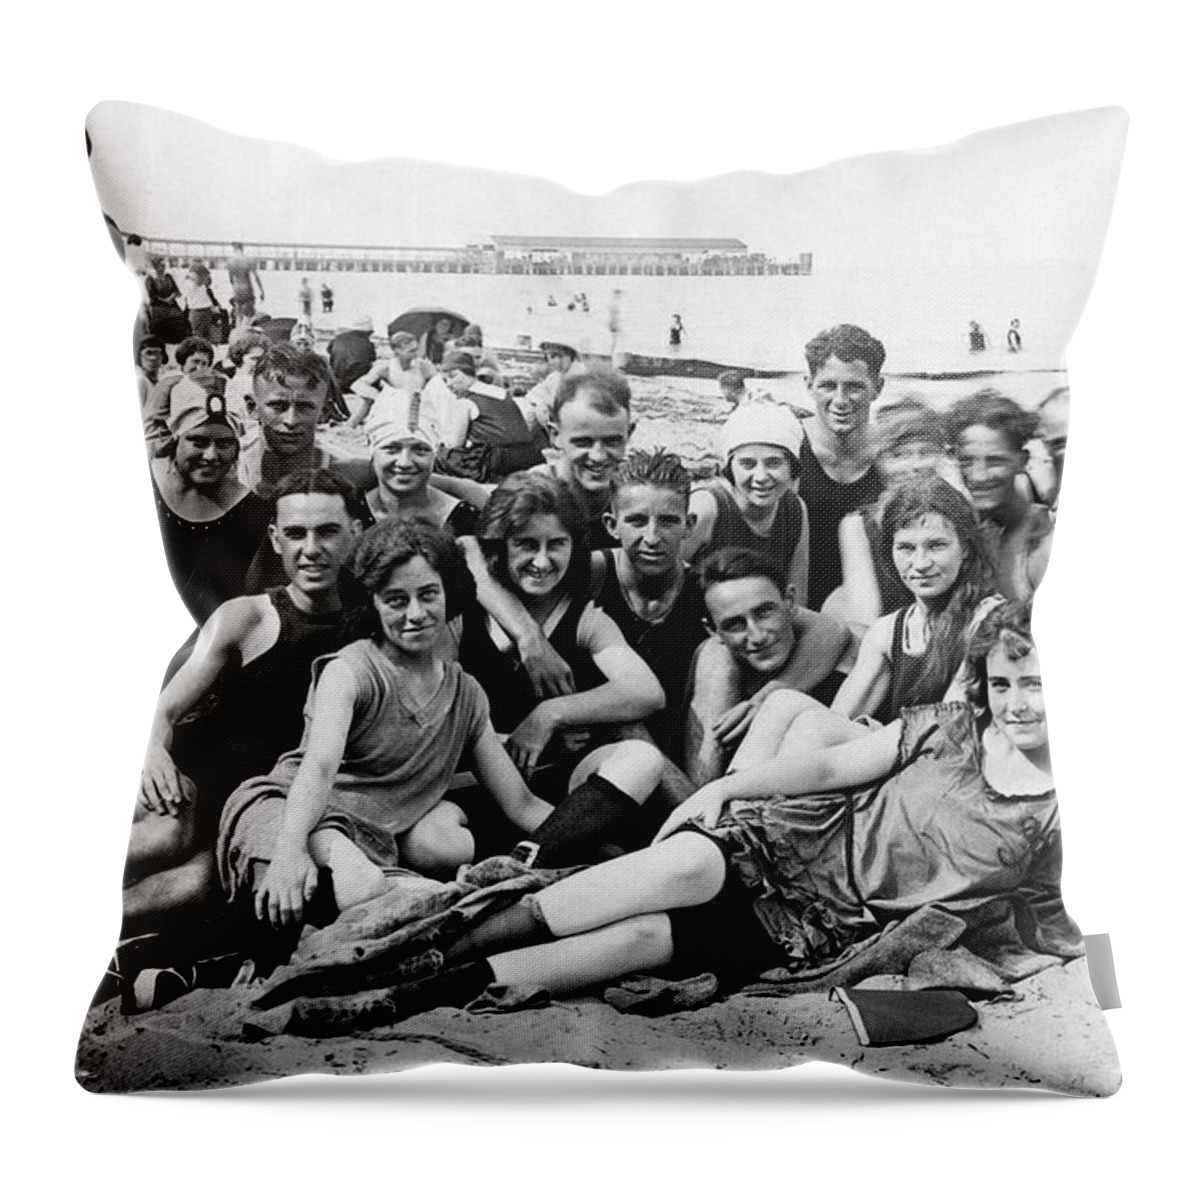 Vintage Throw Pillow featuring the photograph 1925 Beach Party by Historic Image